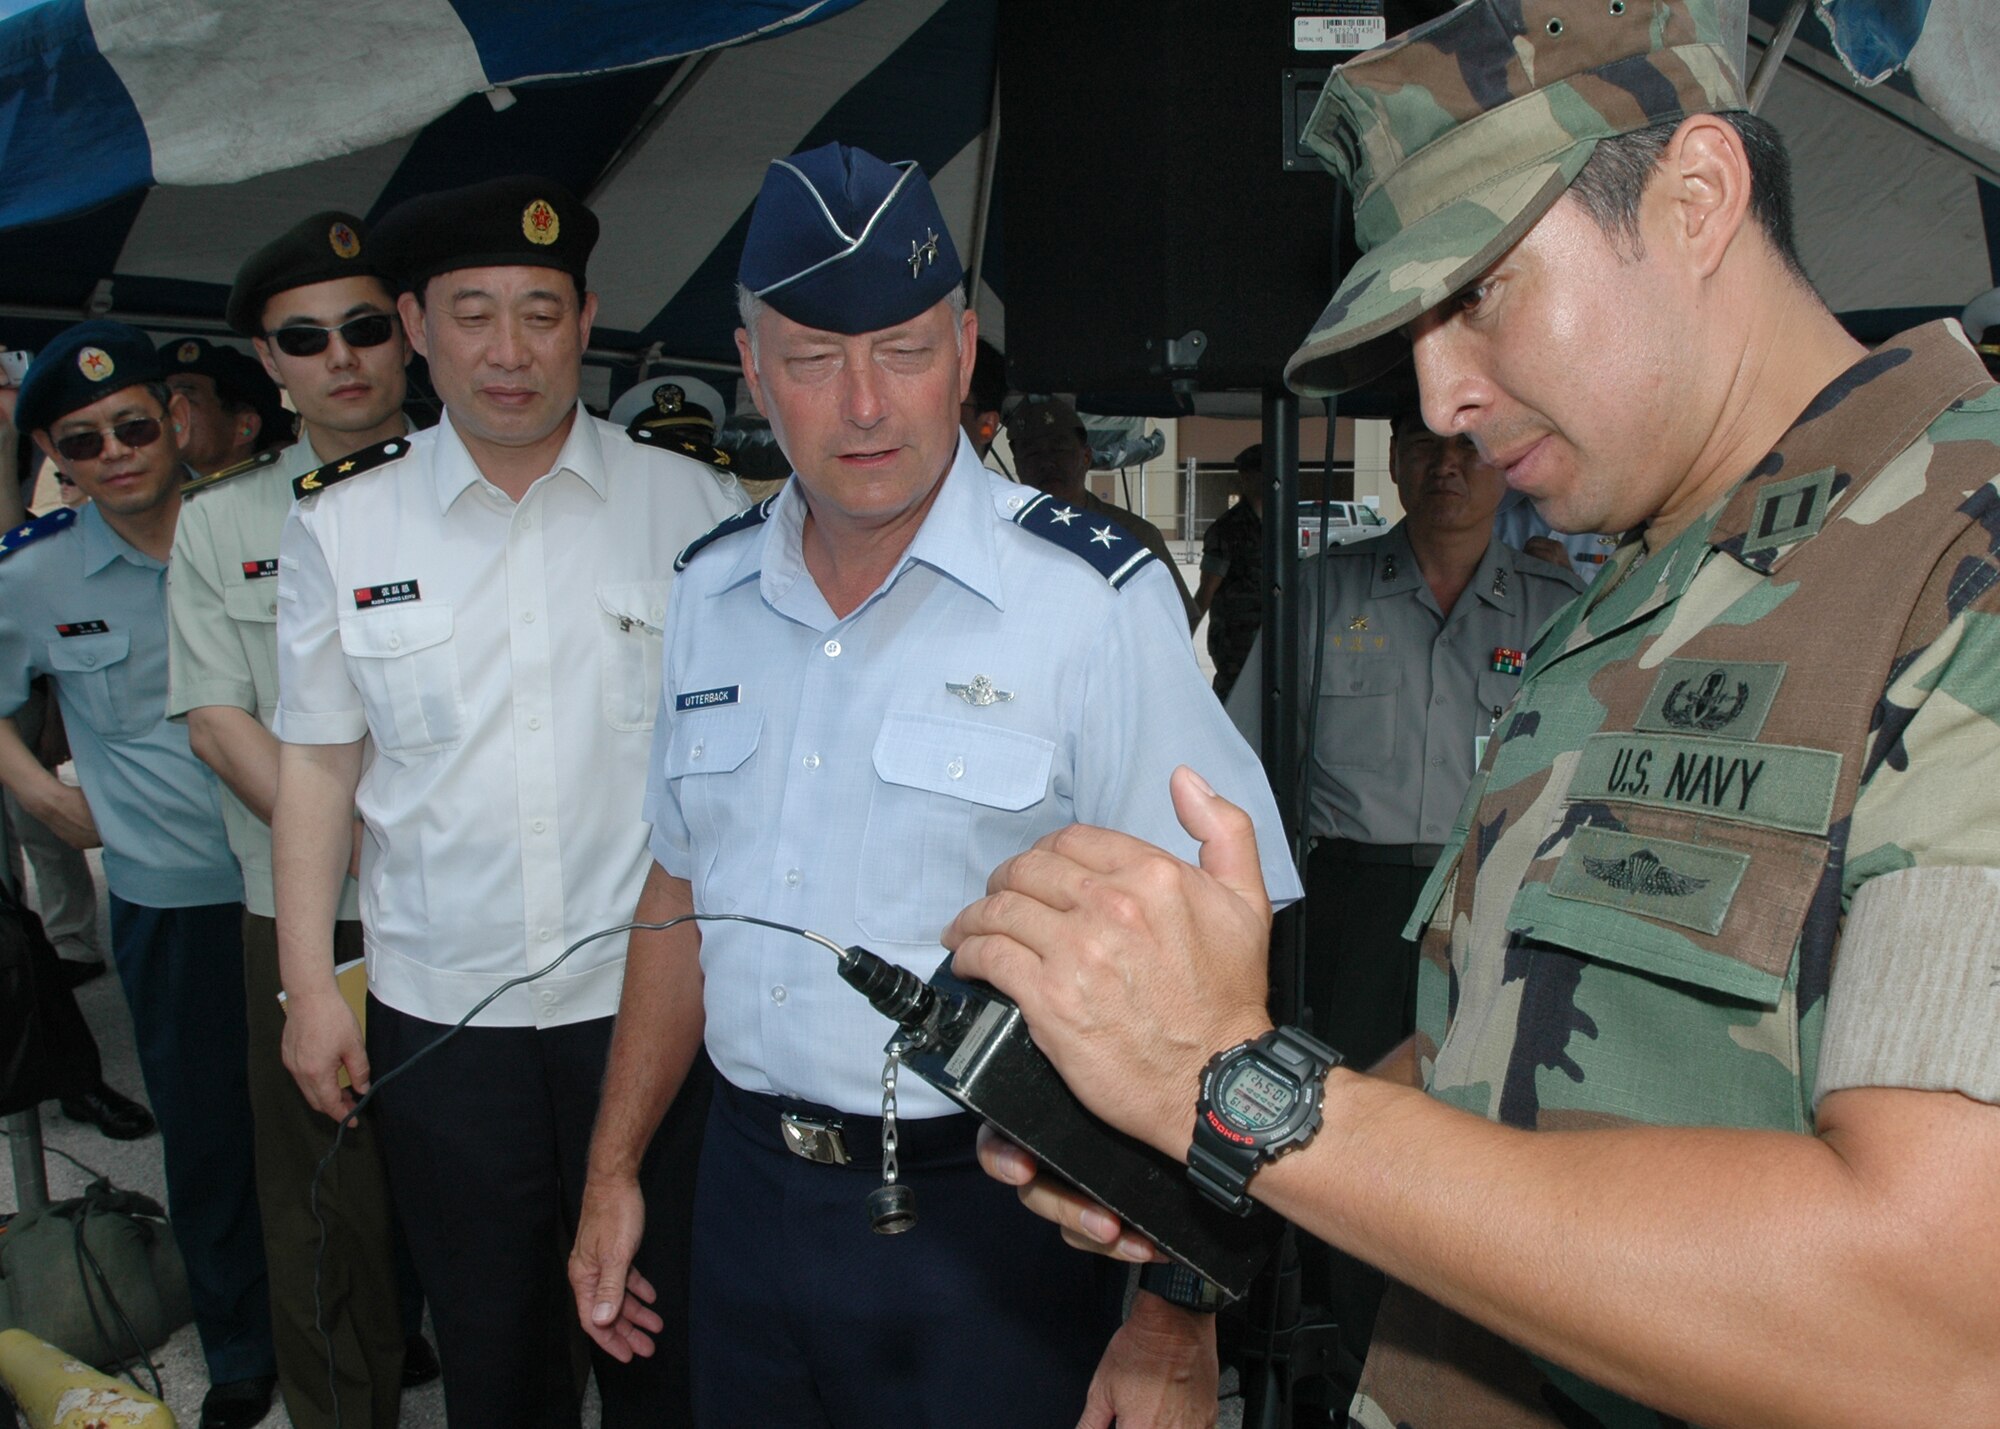 Santa Rita, Guam (June 19, 2006) – Lt. Oscar Rojas, Operations Officer, Explosive Ordinance Disposal Mobile Unit Five explains the functions of a remote detonator to Maj. Gen Loyd Utterback, USAF Deputy Commander, Joint Task Force 519 and Rear Adm. Zhang Leiyu from the People’s Republic of China before detonation of ordnance that was placed within Apra Harbor by EODMU Five.  Dignitaries from Australia, China, India, Japan, Korea, Russia and Singapore were present during this demonstration. The group also observed demonstrations by Naval Special Warfare Unit One and Mobile Security Squadron Seven during their tour.  The thirty three foreign dignitaries are currently here to observe the U.S. Pacific Command exercise Valiant Shield 2006 which involves approximately 22,000 Sailors, Airmen, Marines, Soldiers and Coast Guardsmen, one of the largest joint-military exercises in the Pacific in more than a decade. (U.S. Navy photo by PH2 (AW) John F. Looney)